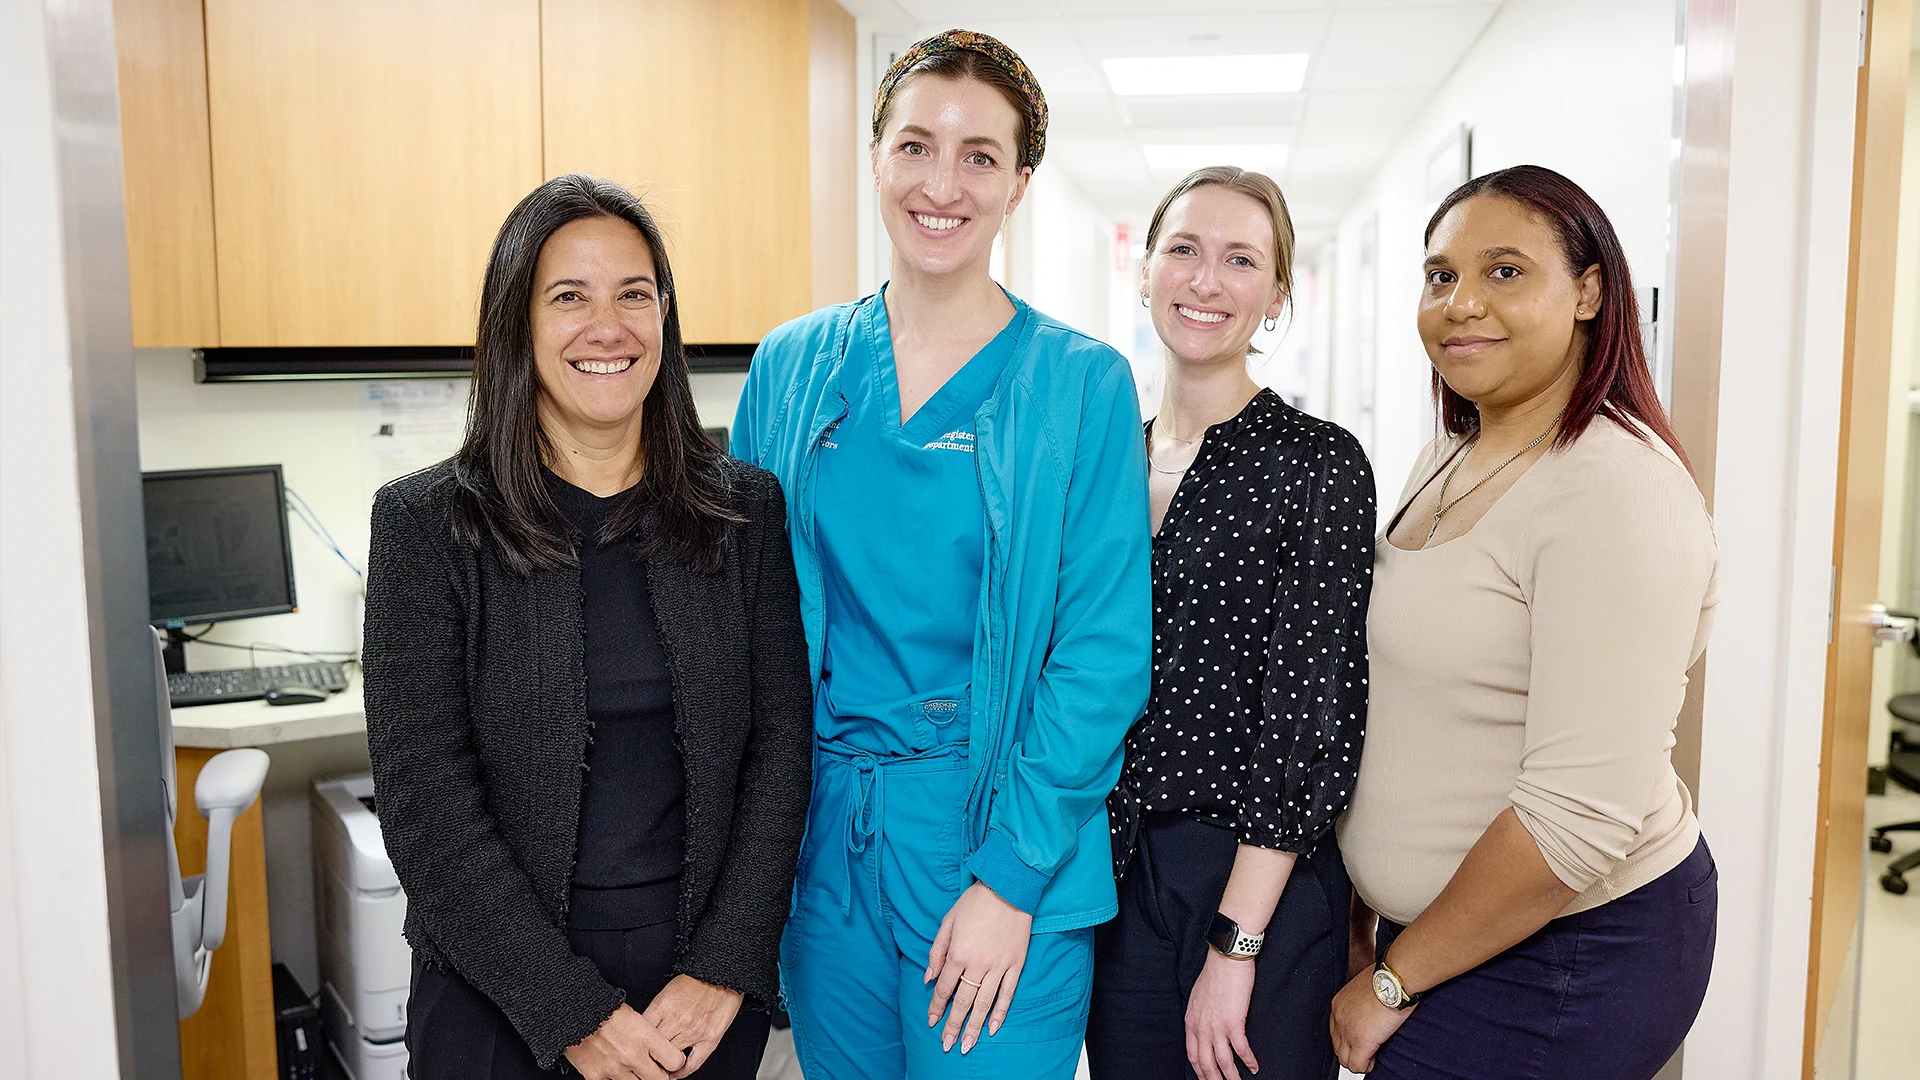 Aimee Lucas, MD, left, leads a surveillance team for people at high risk for pancreatic cancer. The team also includes, from left, Rachel Estime, BSN, RN; Miranda Veeser, DNP, FNP-C; and Karen Vazquez, Endoscopy Scheduling.
